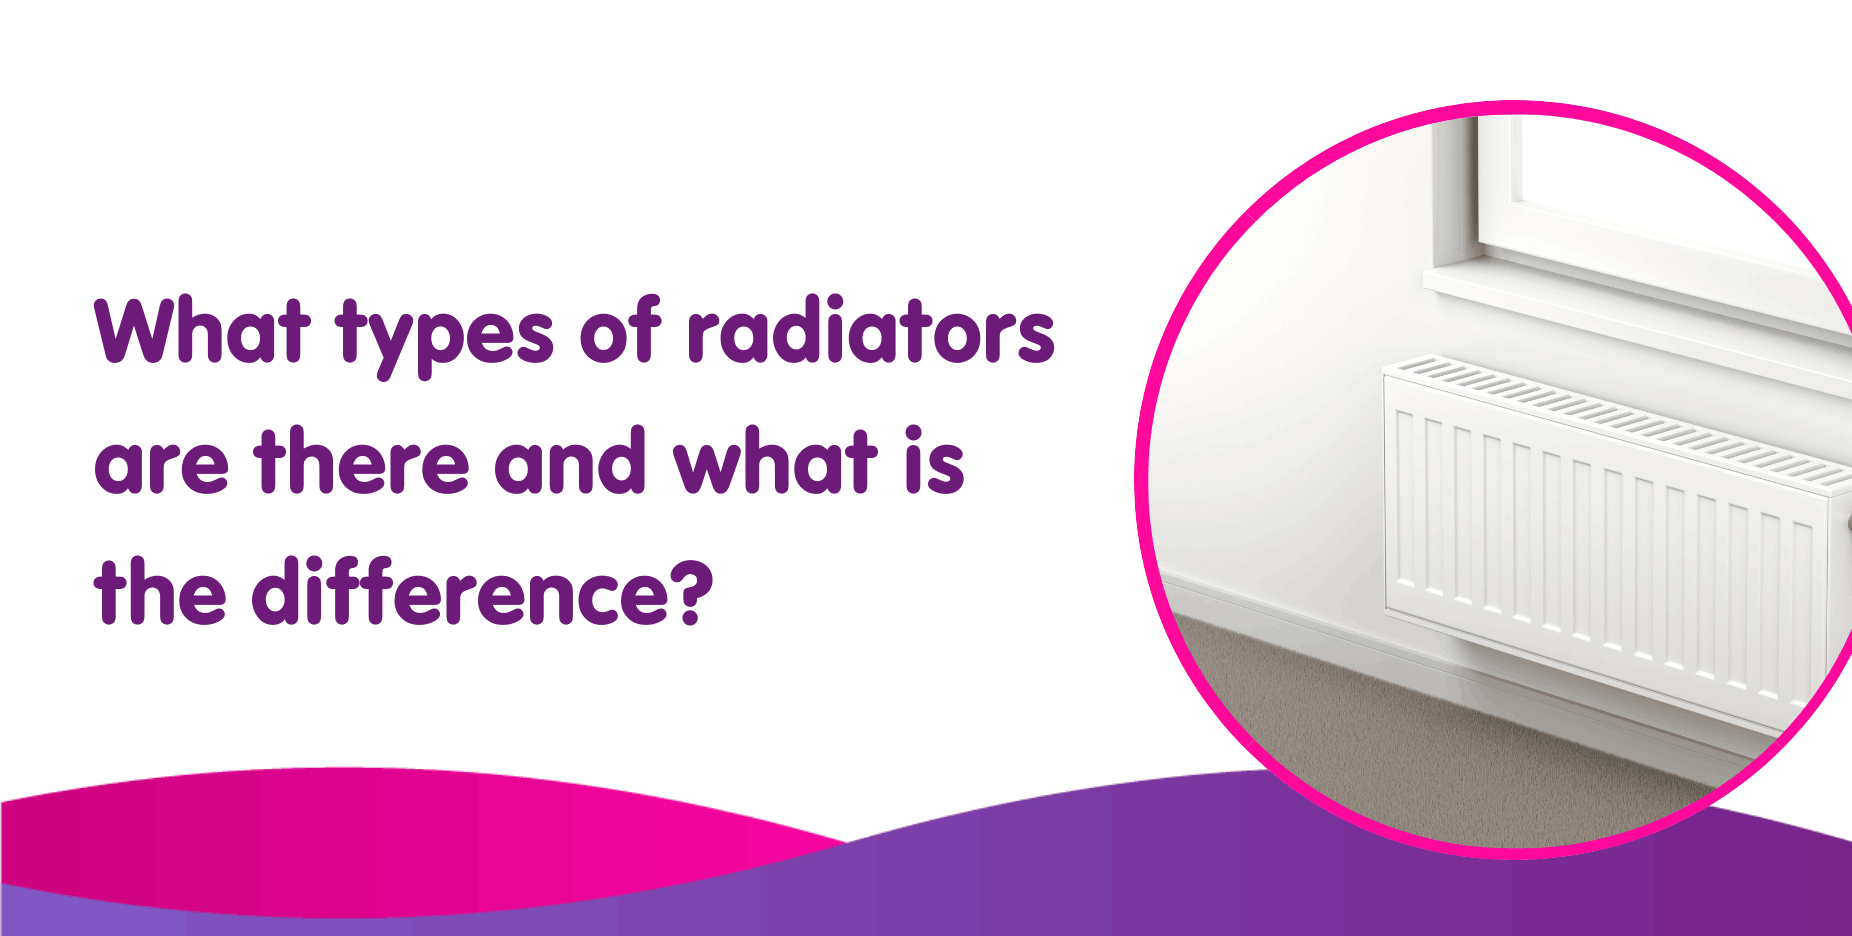 What types of radiators are there and what is the difference